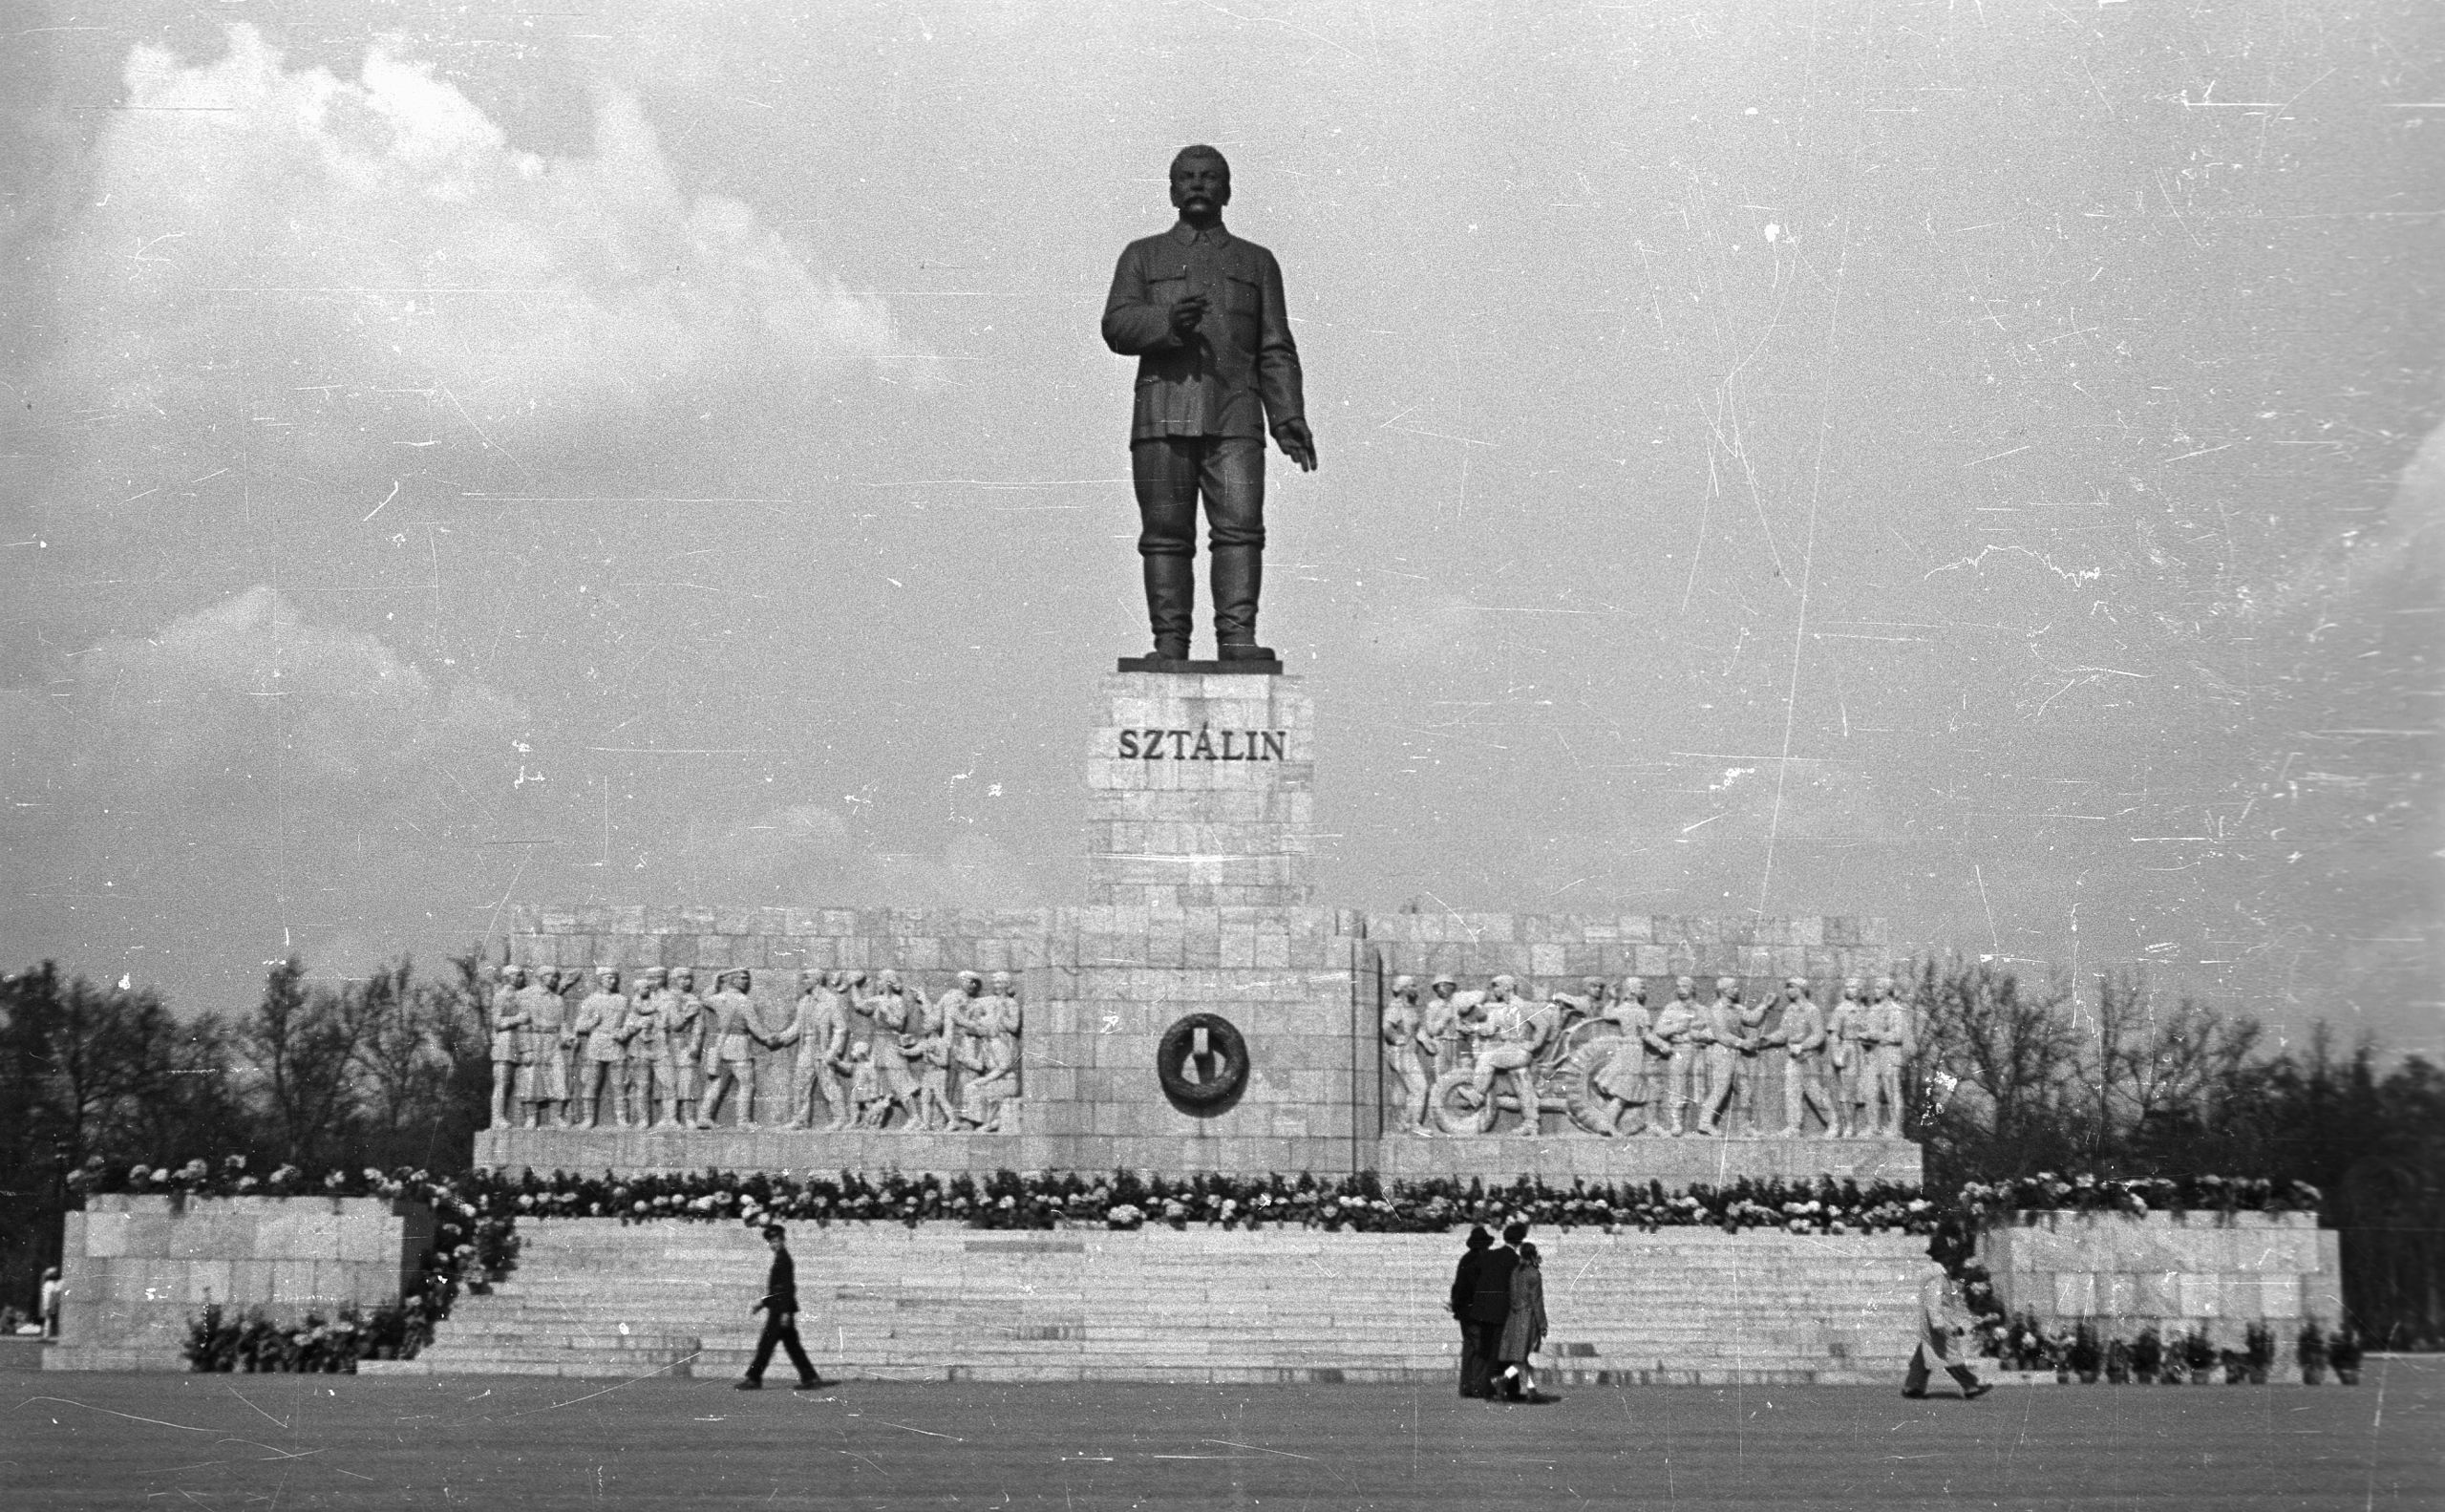 Photo of The massive statue of Stalin statue in Budapest...Torn down by protesters during 1956 revolt in Budapest, Hungary (Wikipedia)